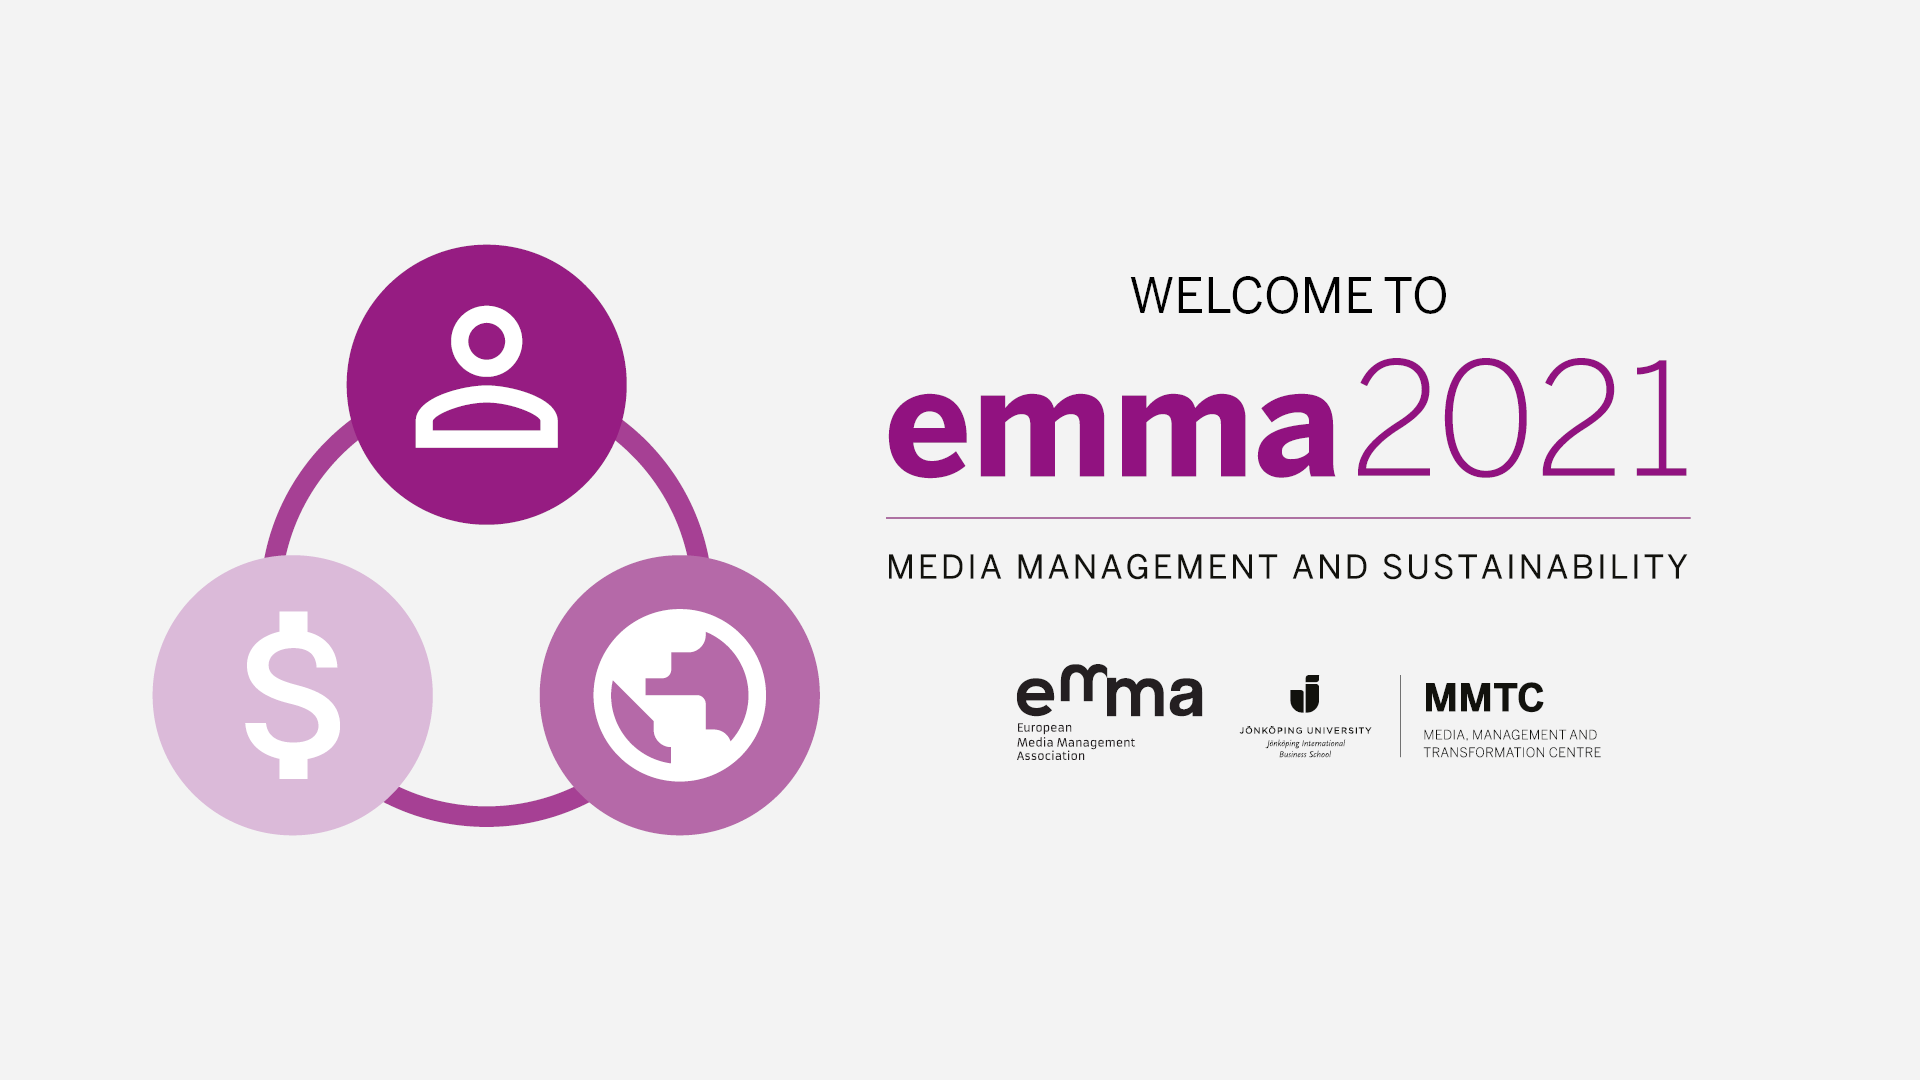 Welcome to emma conference text with logo